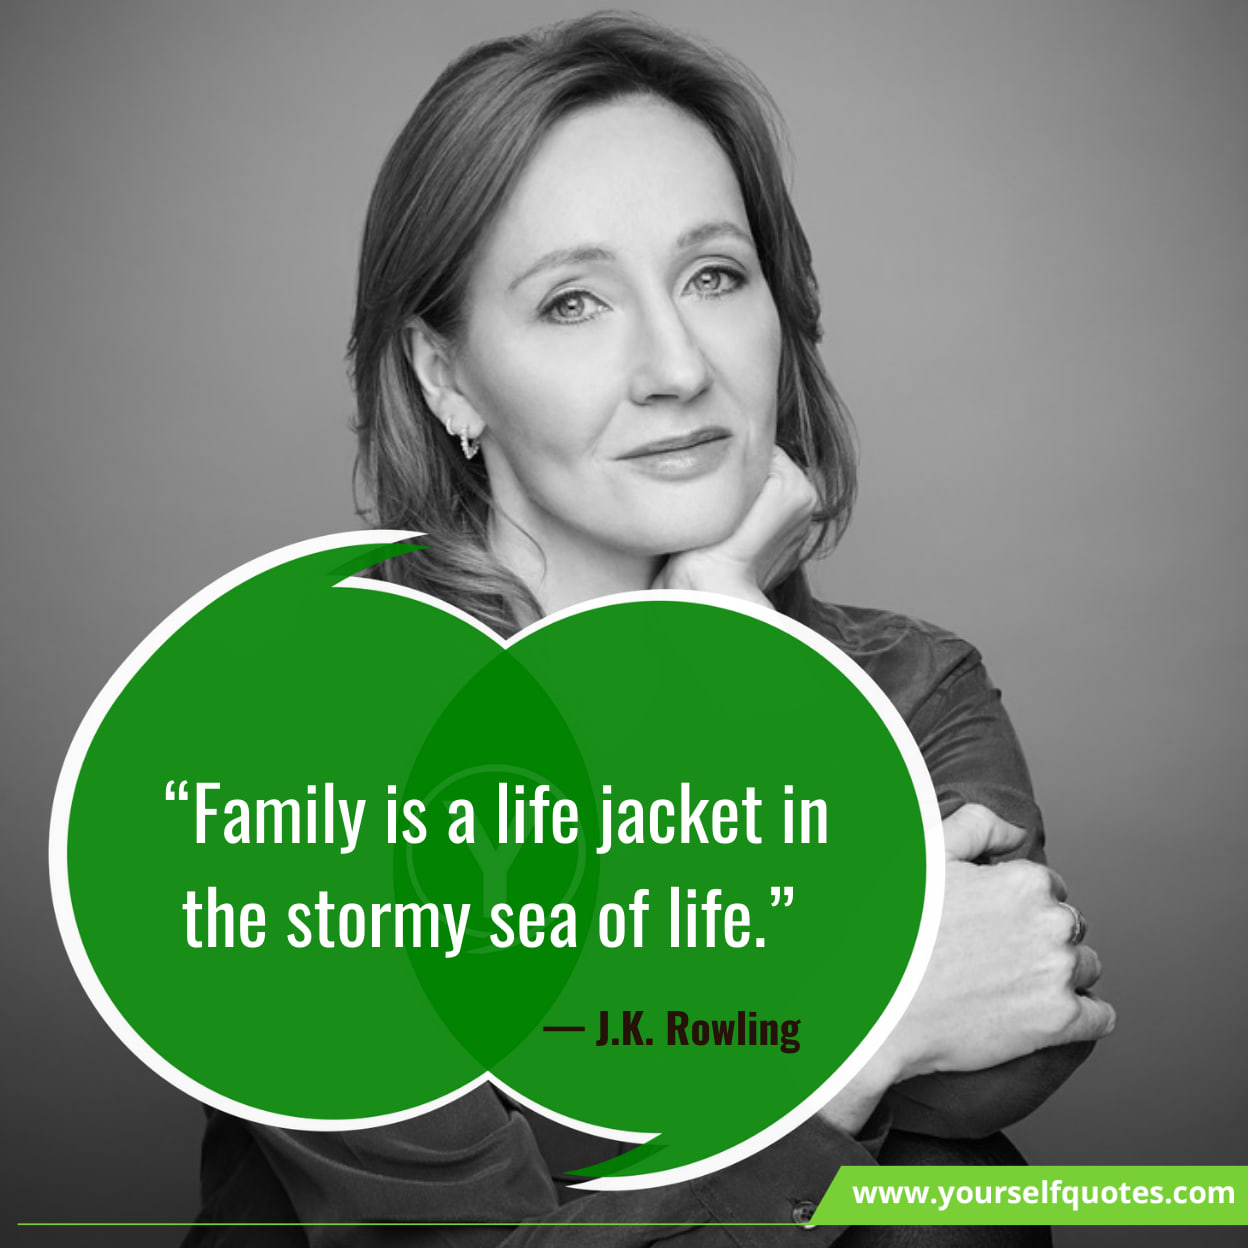 Famous Quotes About Family